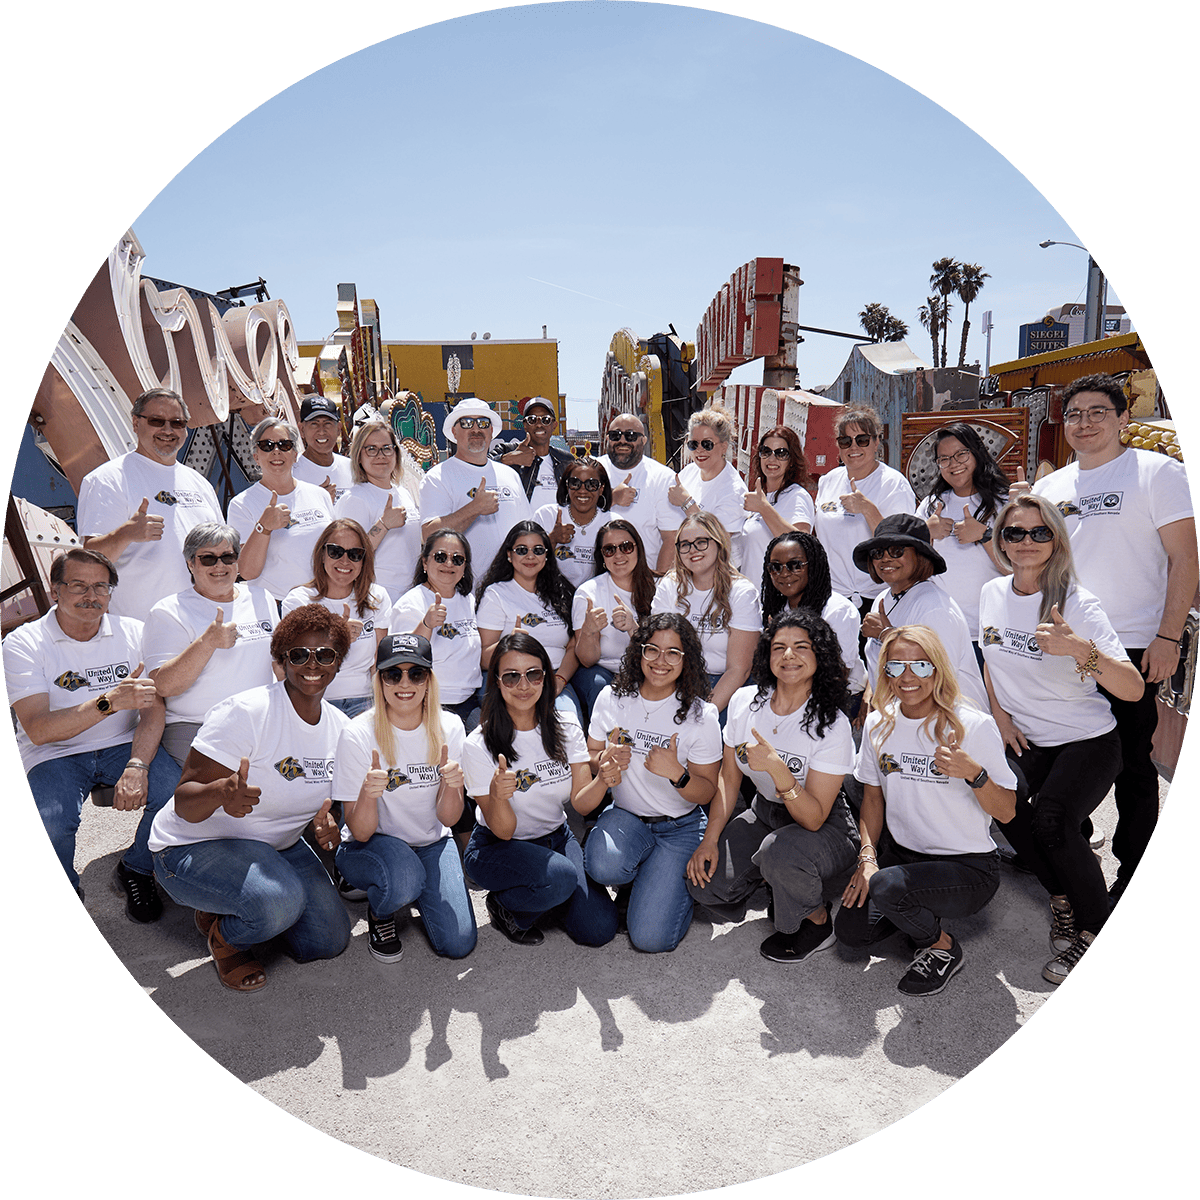 Employees at the neon museum